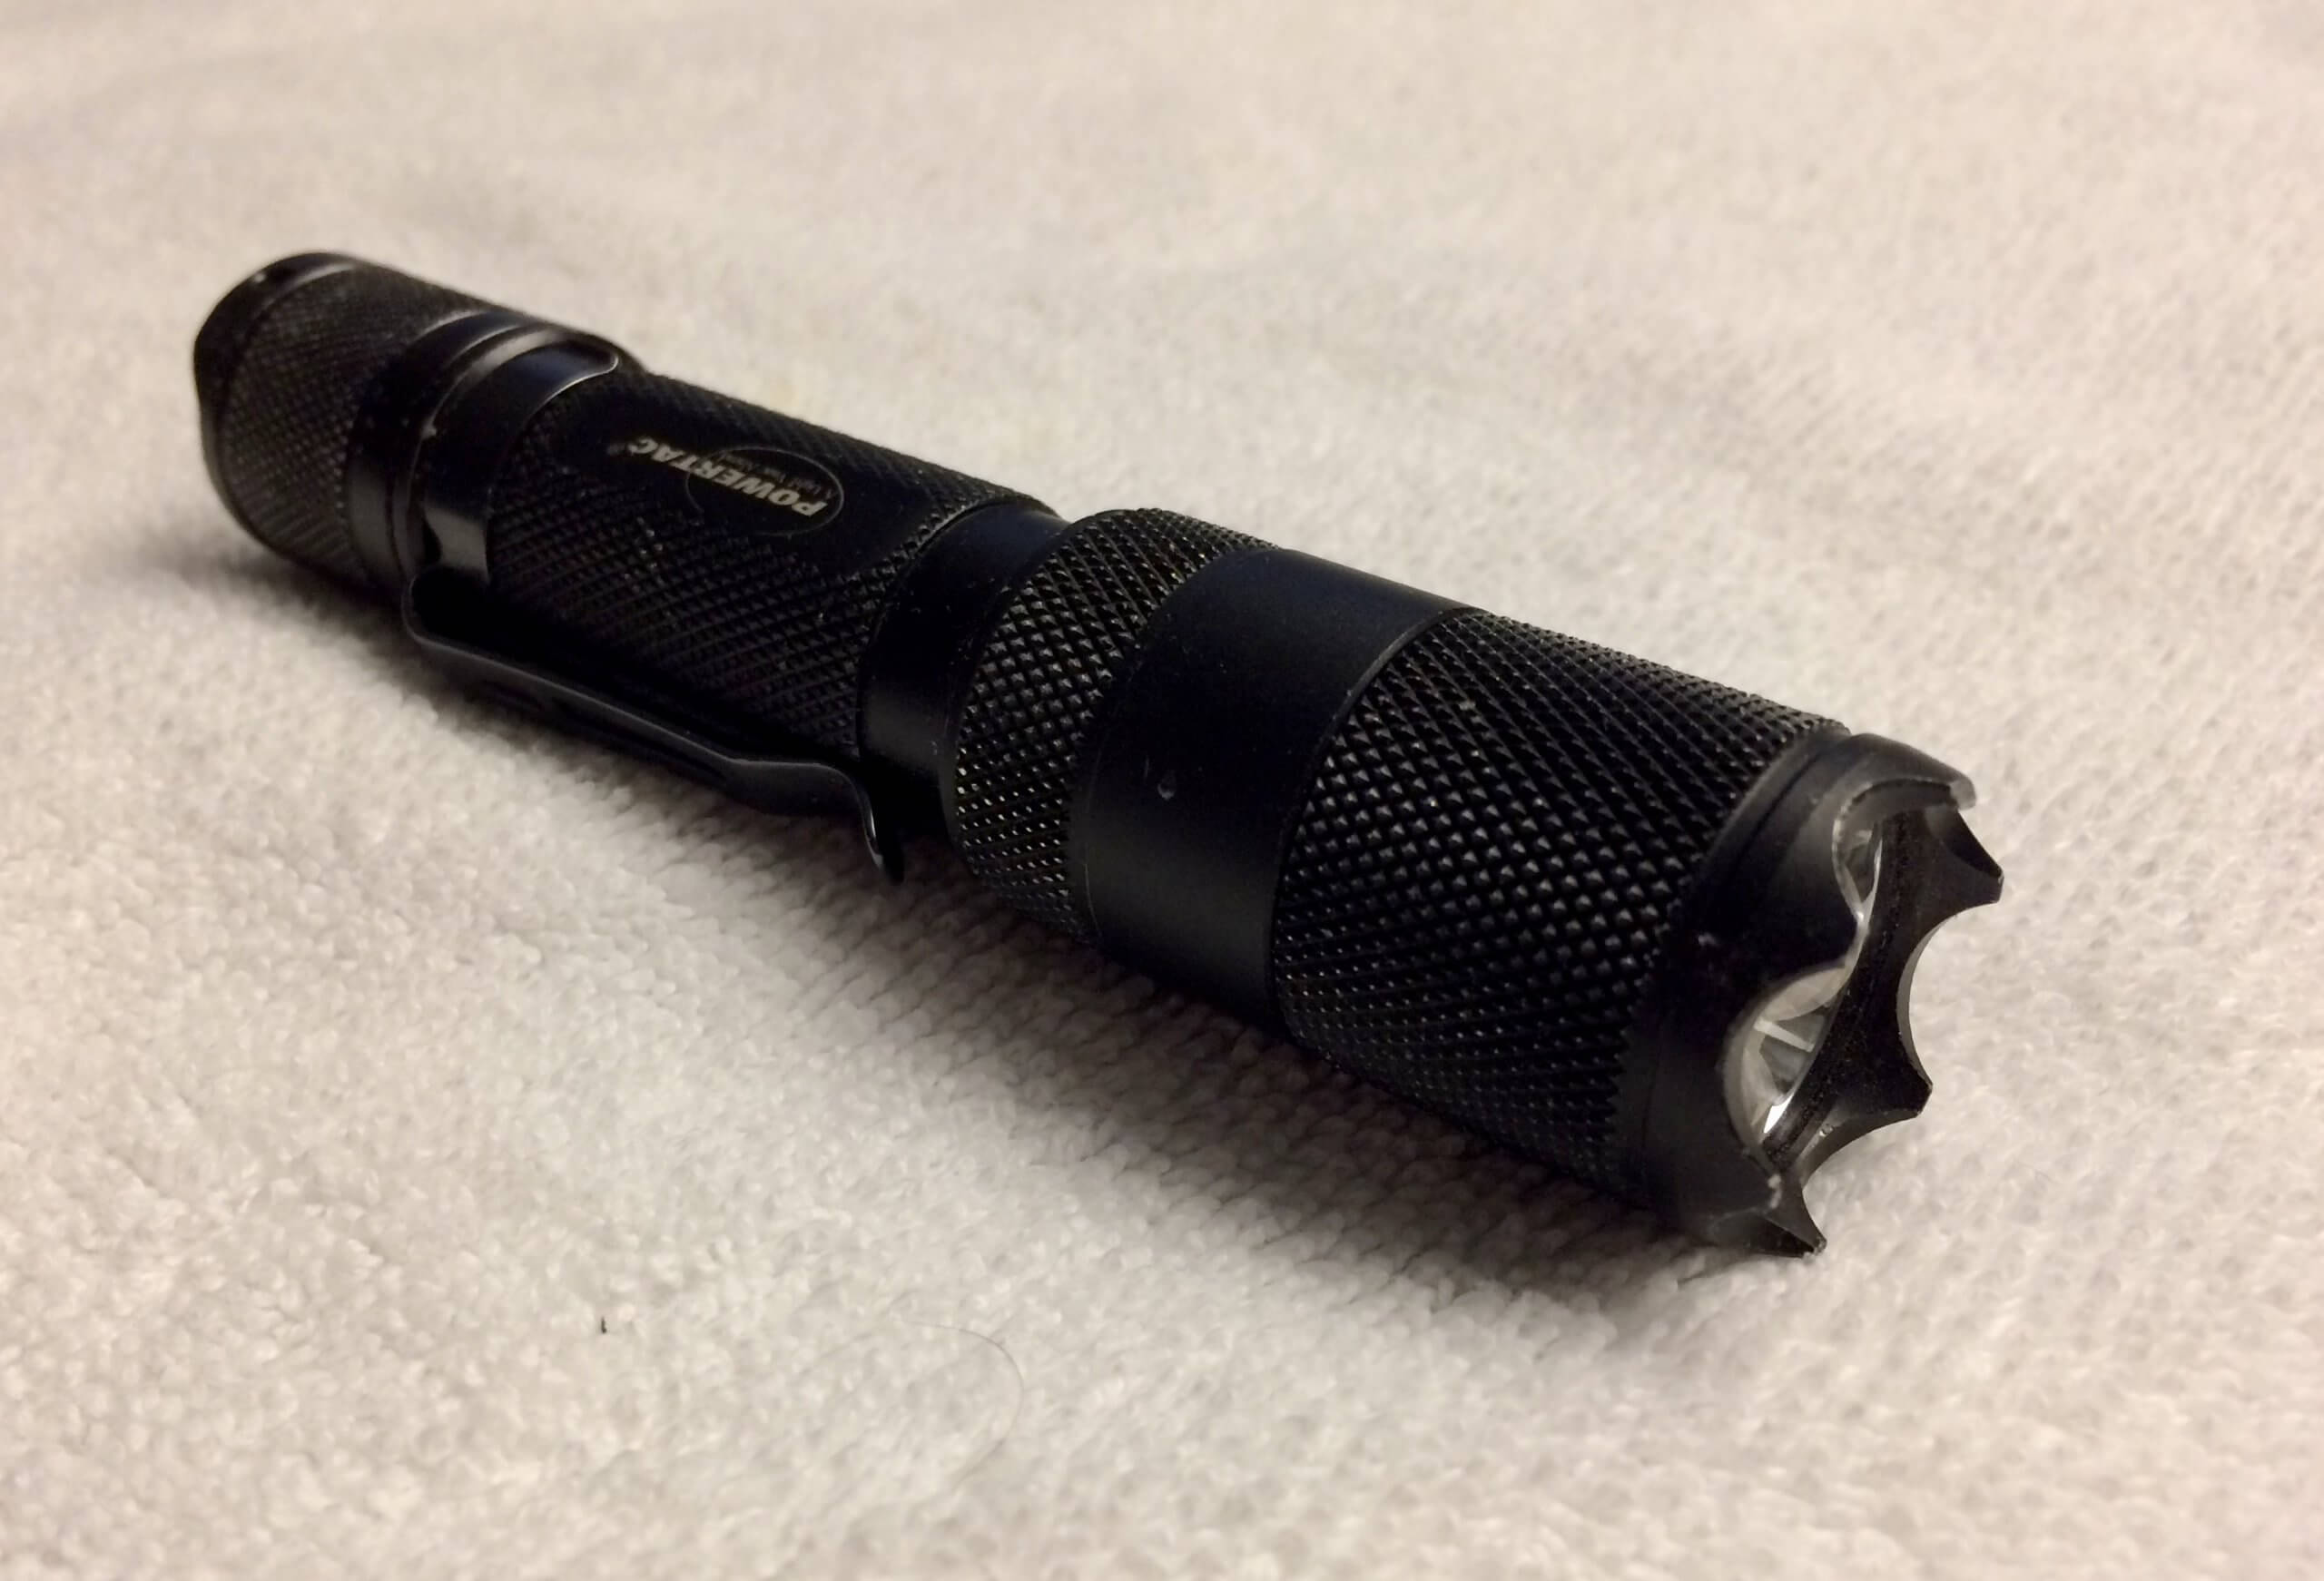 Impact vs Edged: Advantages and Disadvantages of Crenelated Flashlights